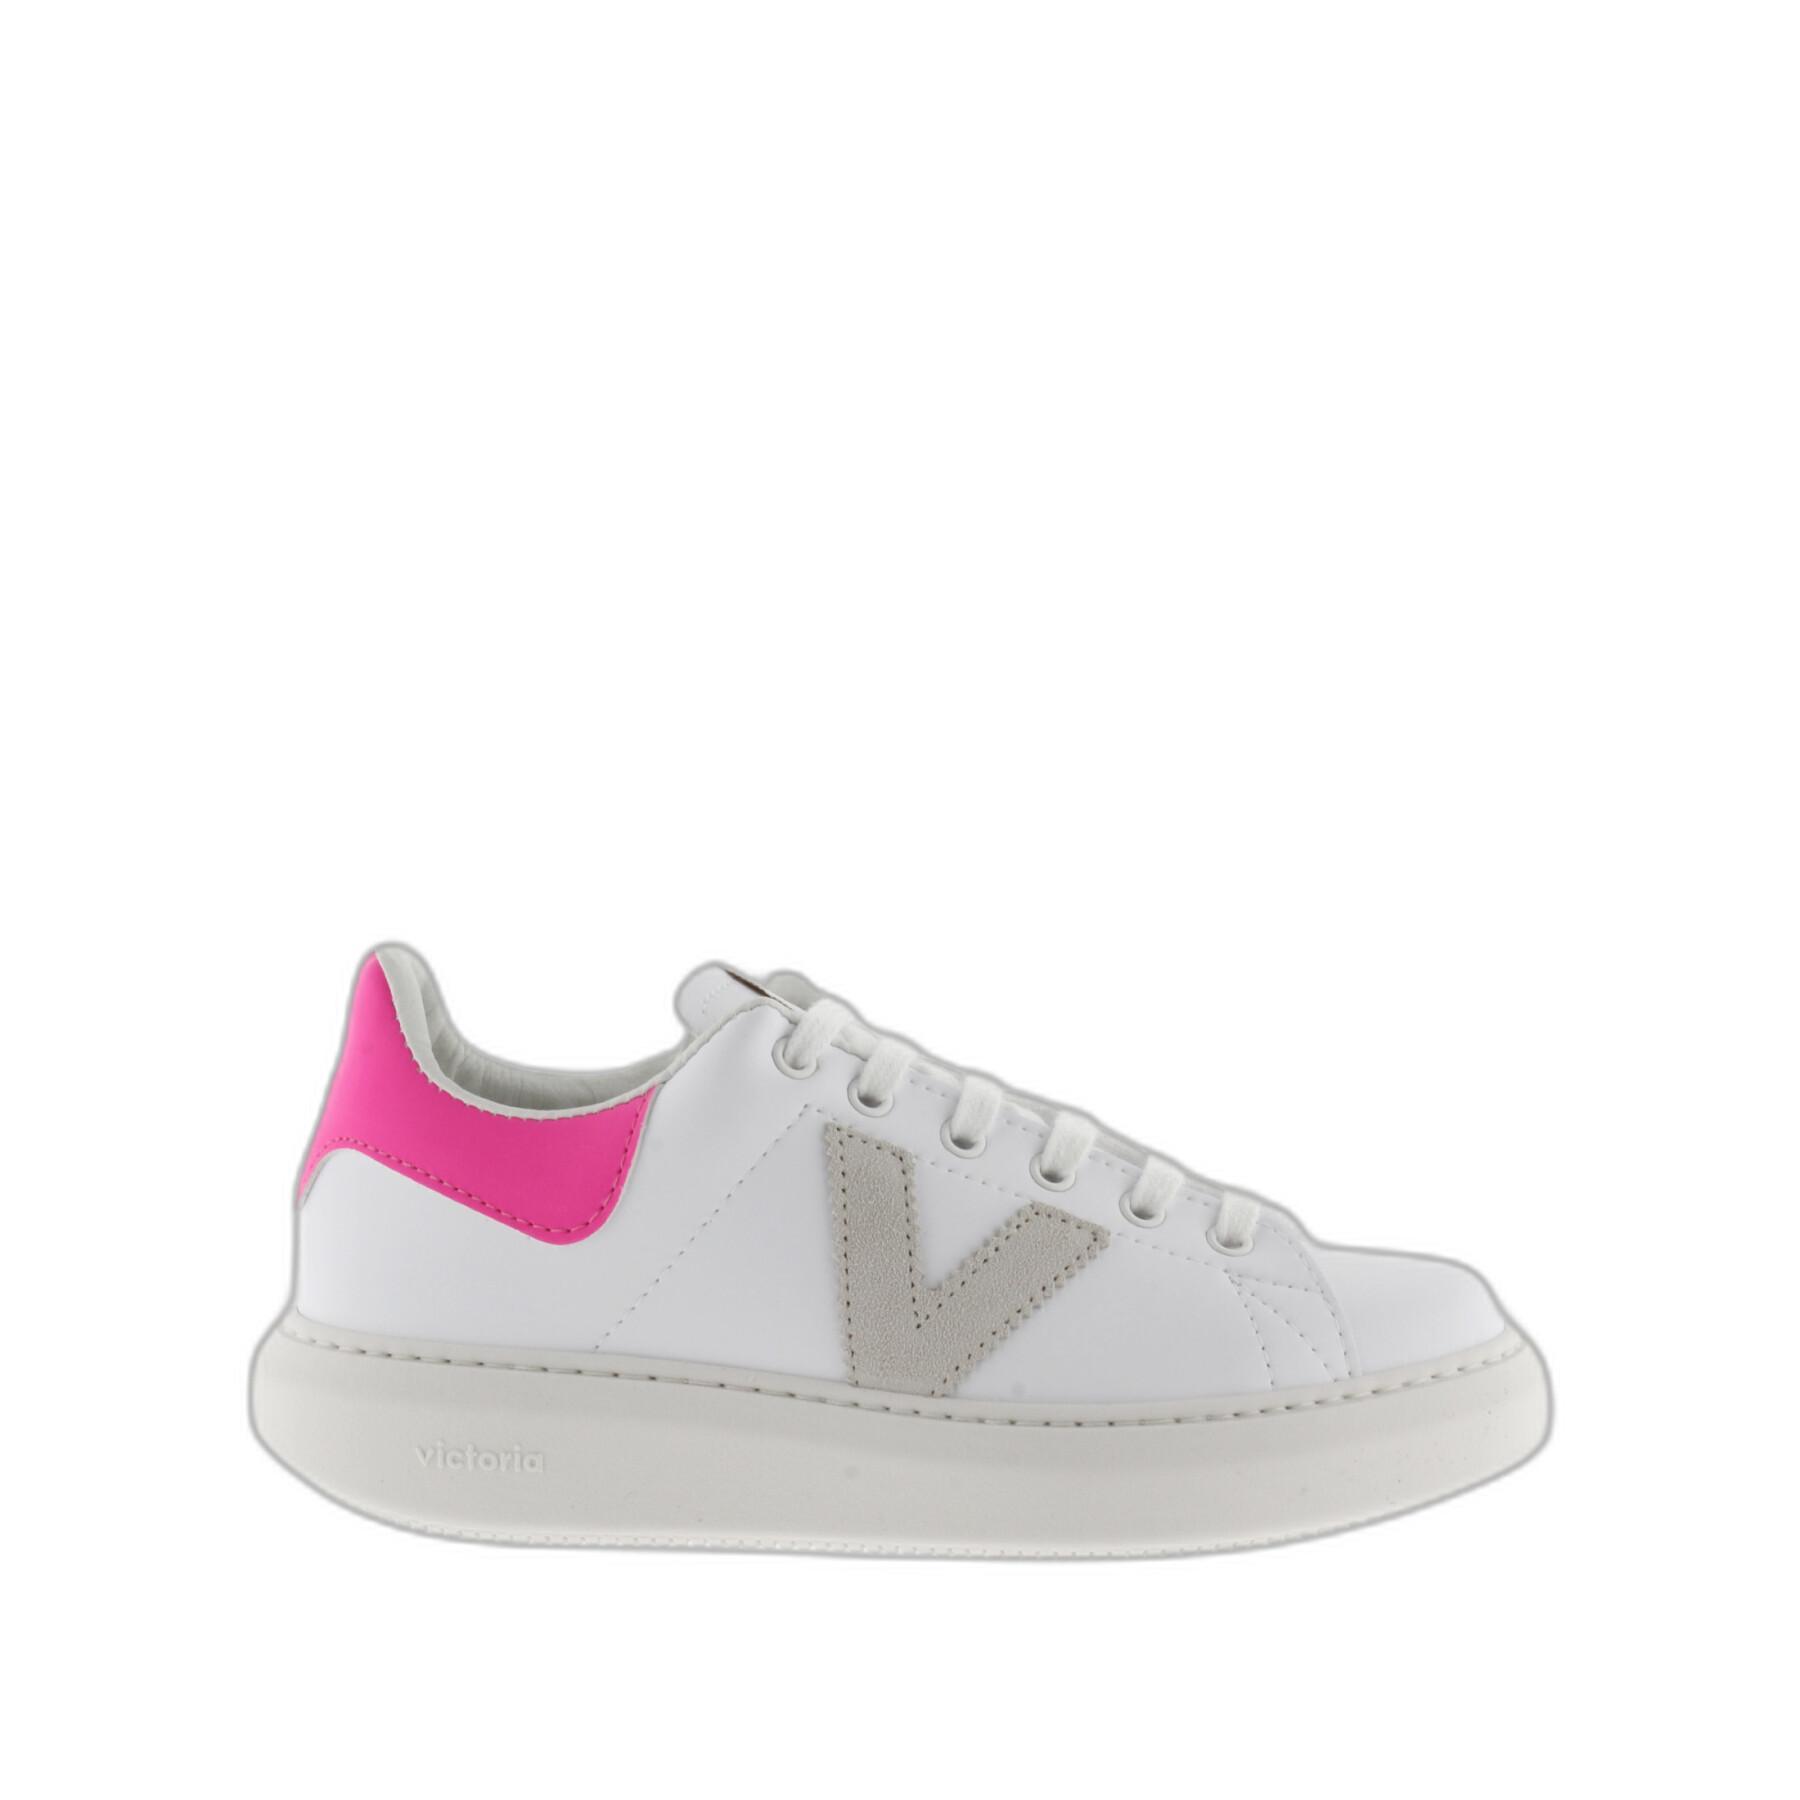 Leather & neon effect sneakers for women Victoria Milan